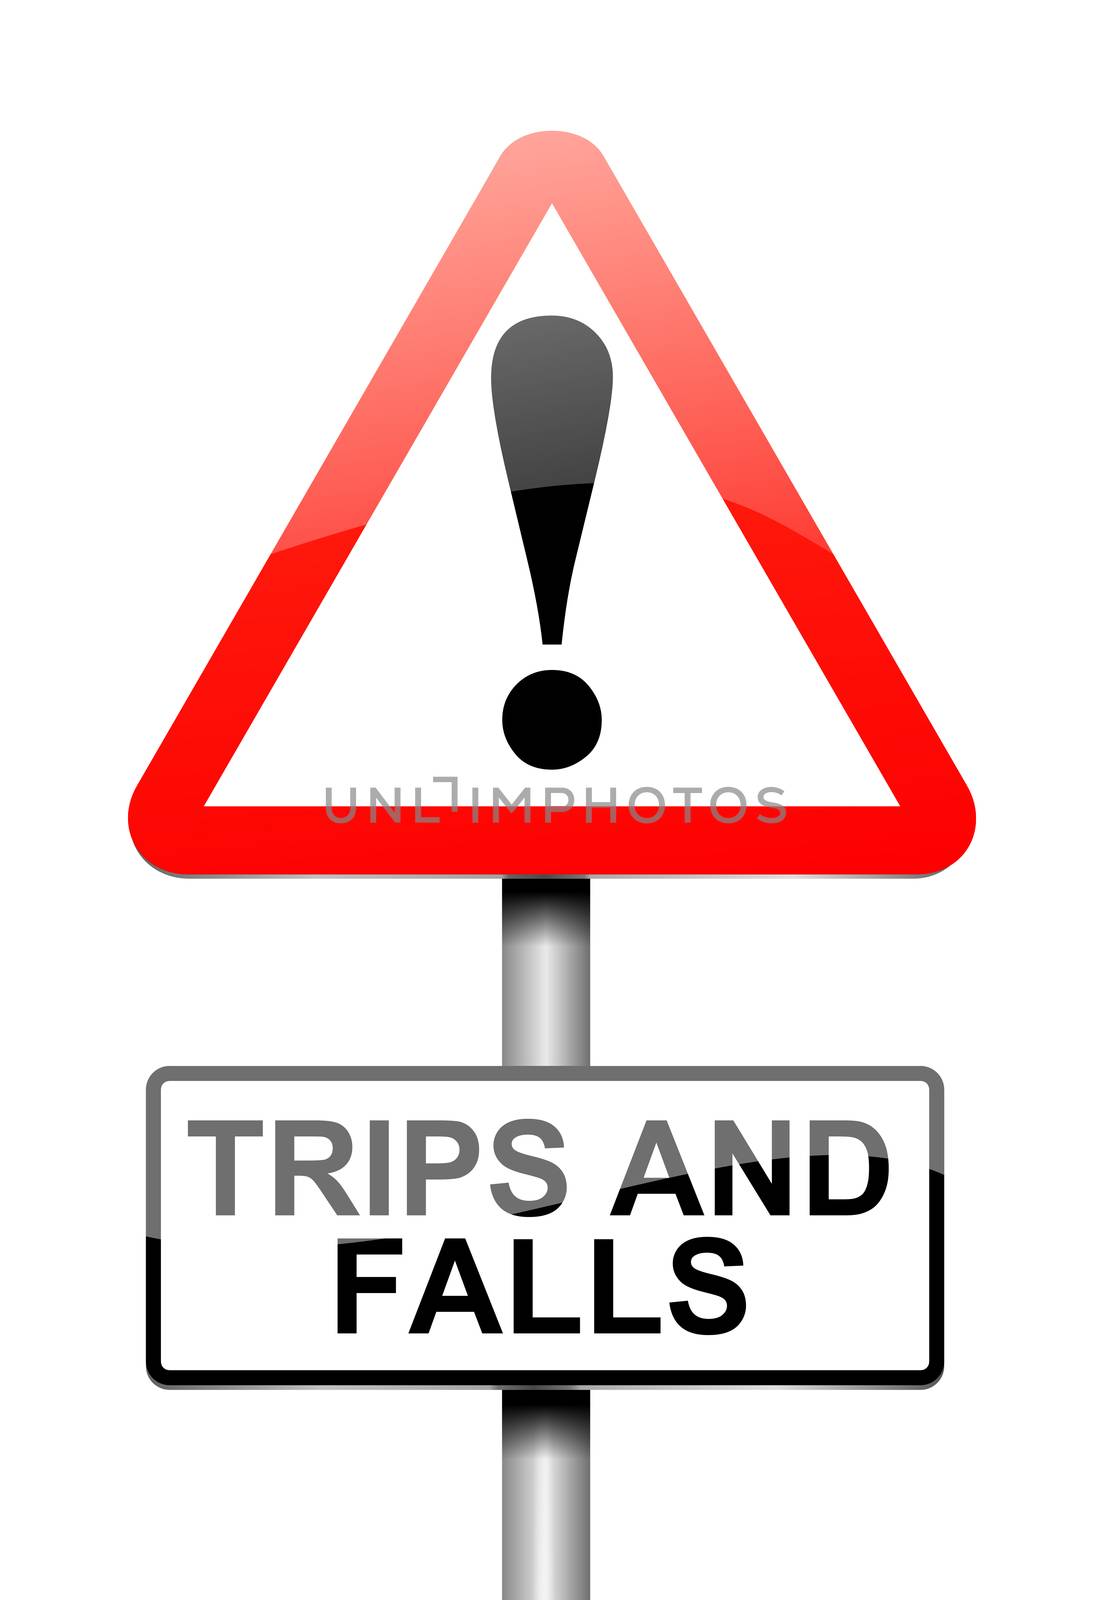 Trip and fall warning. by 72soul